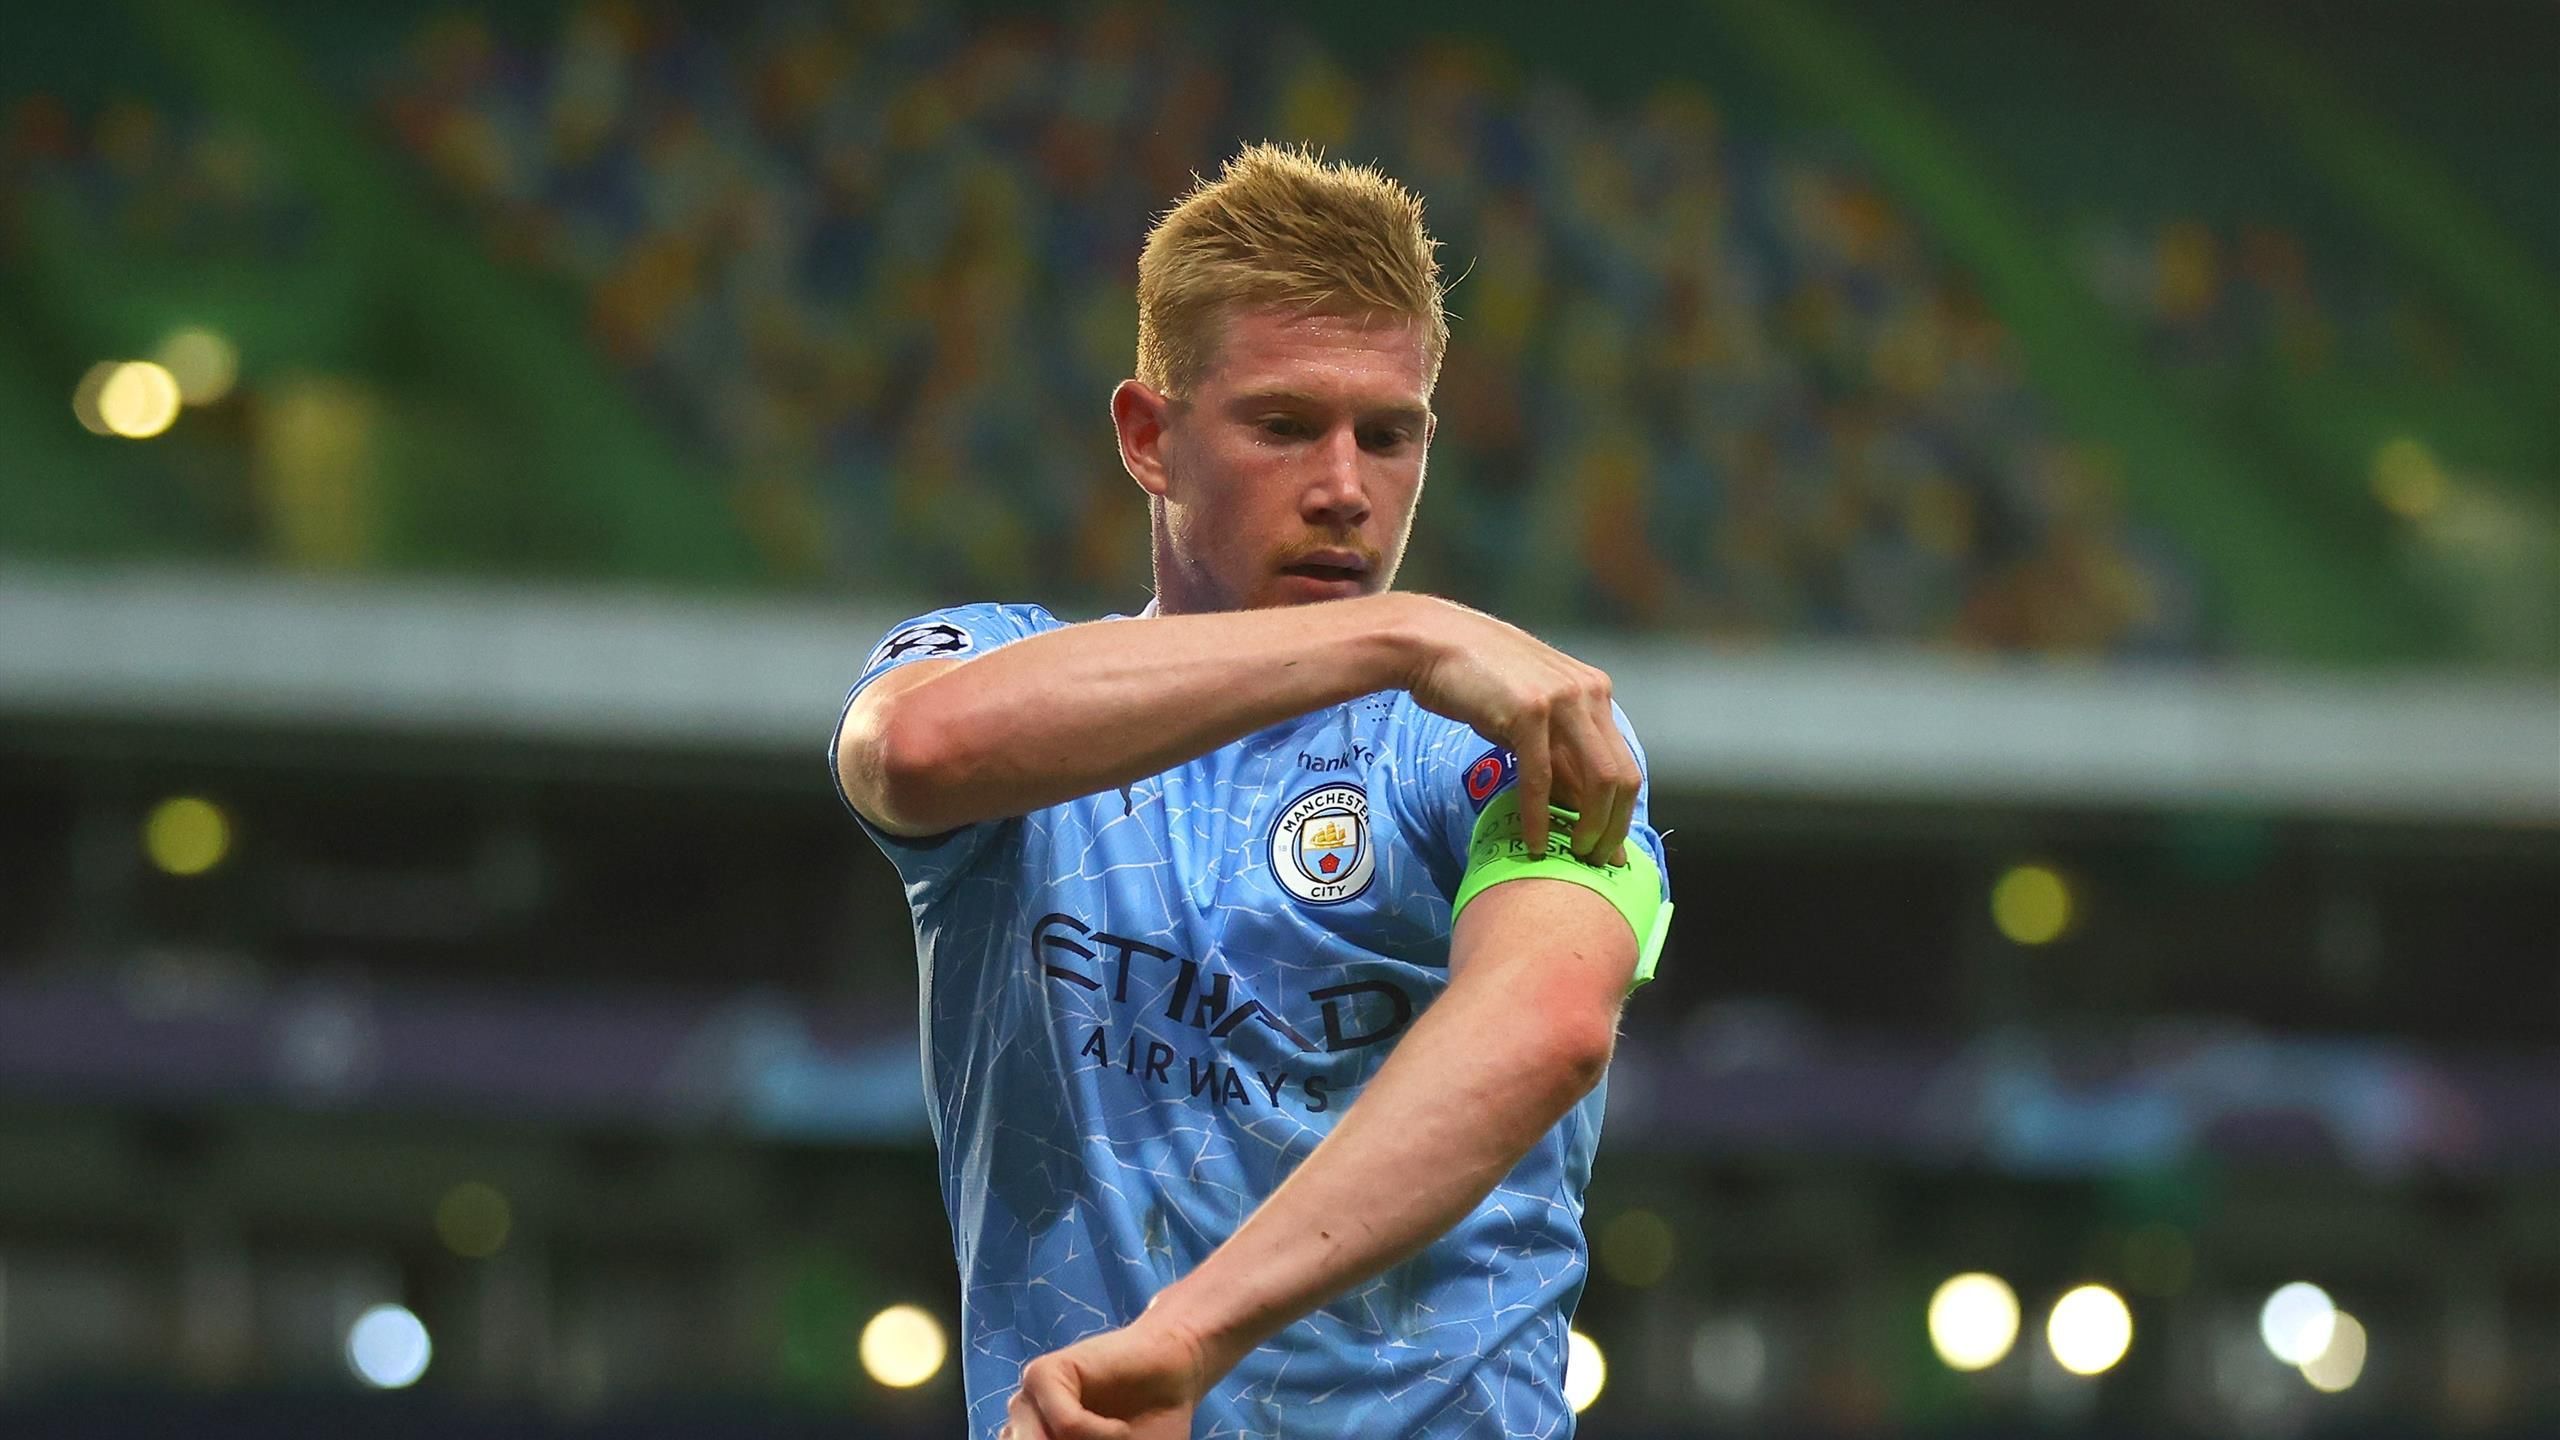 Kevin De Bruyne: 'It's a different year, same stuff'